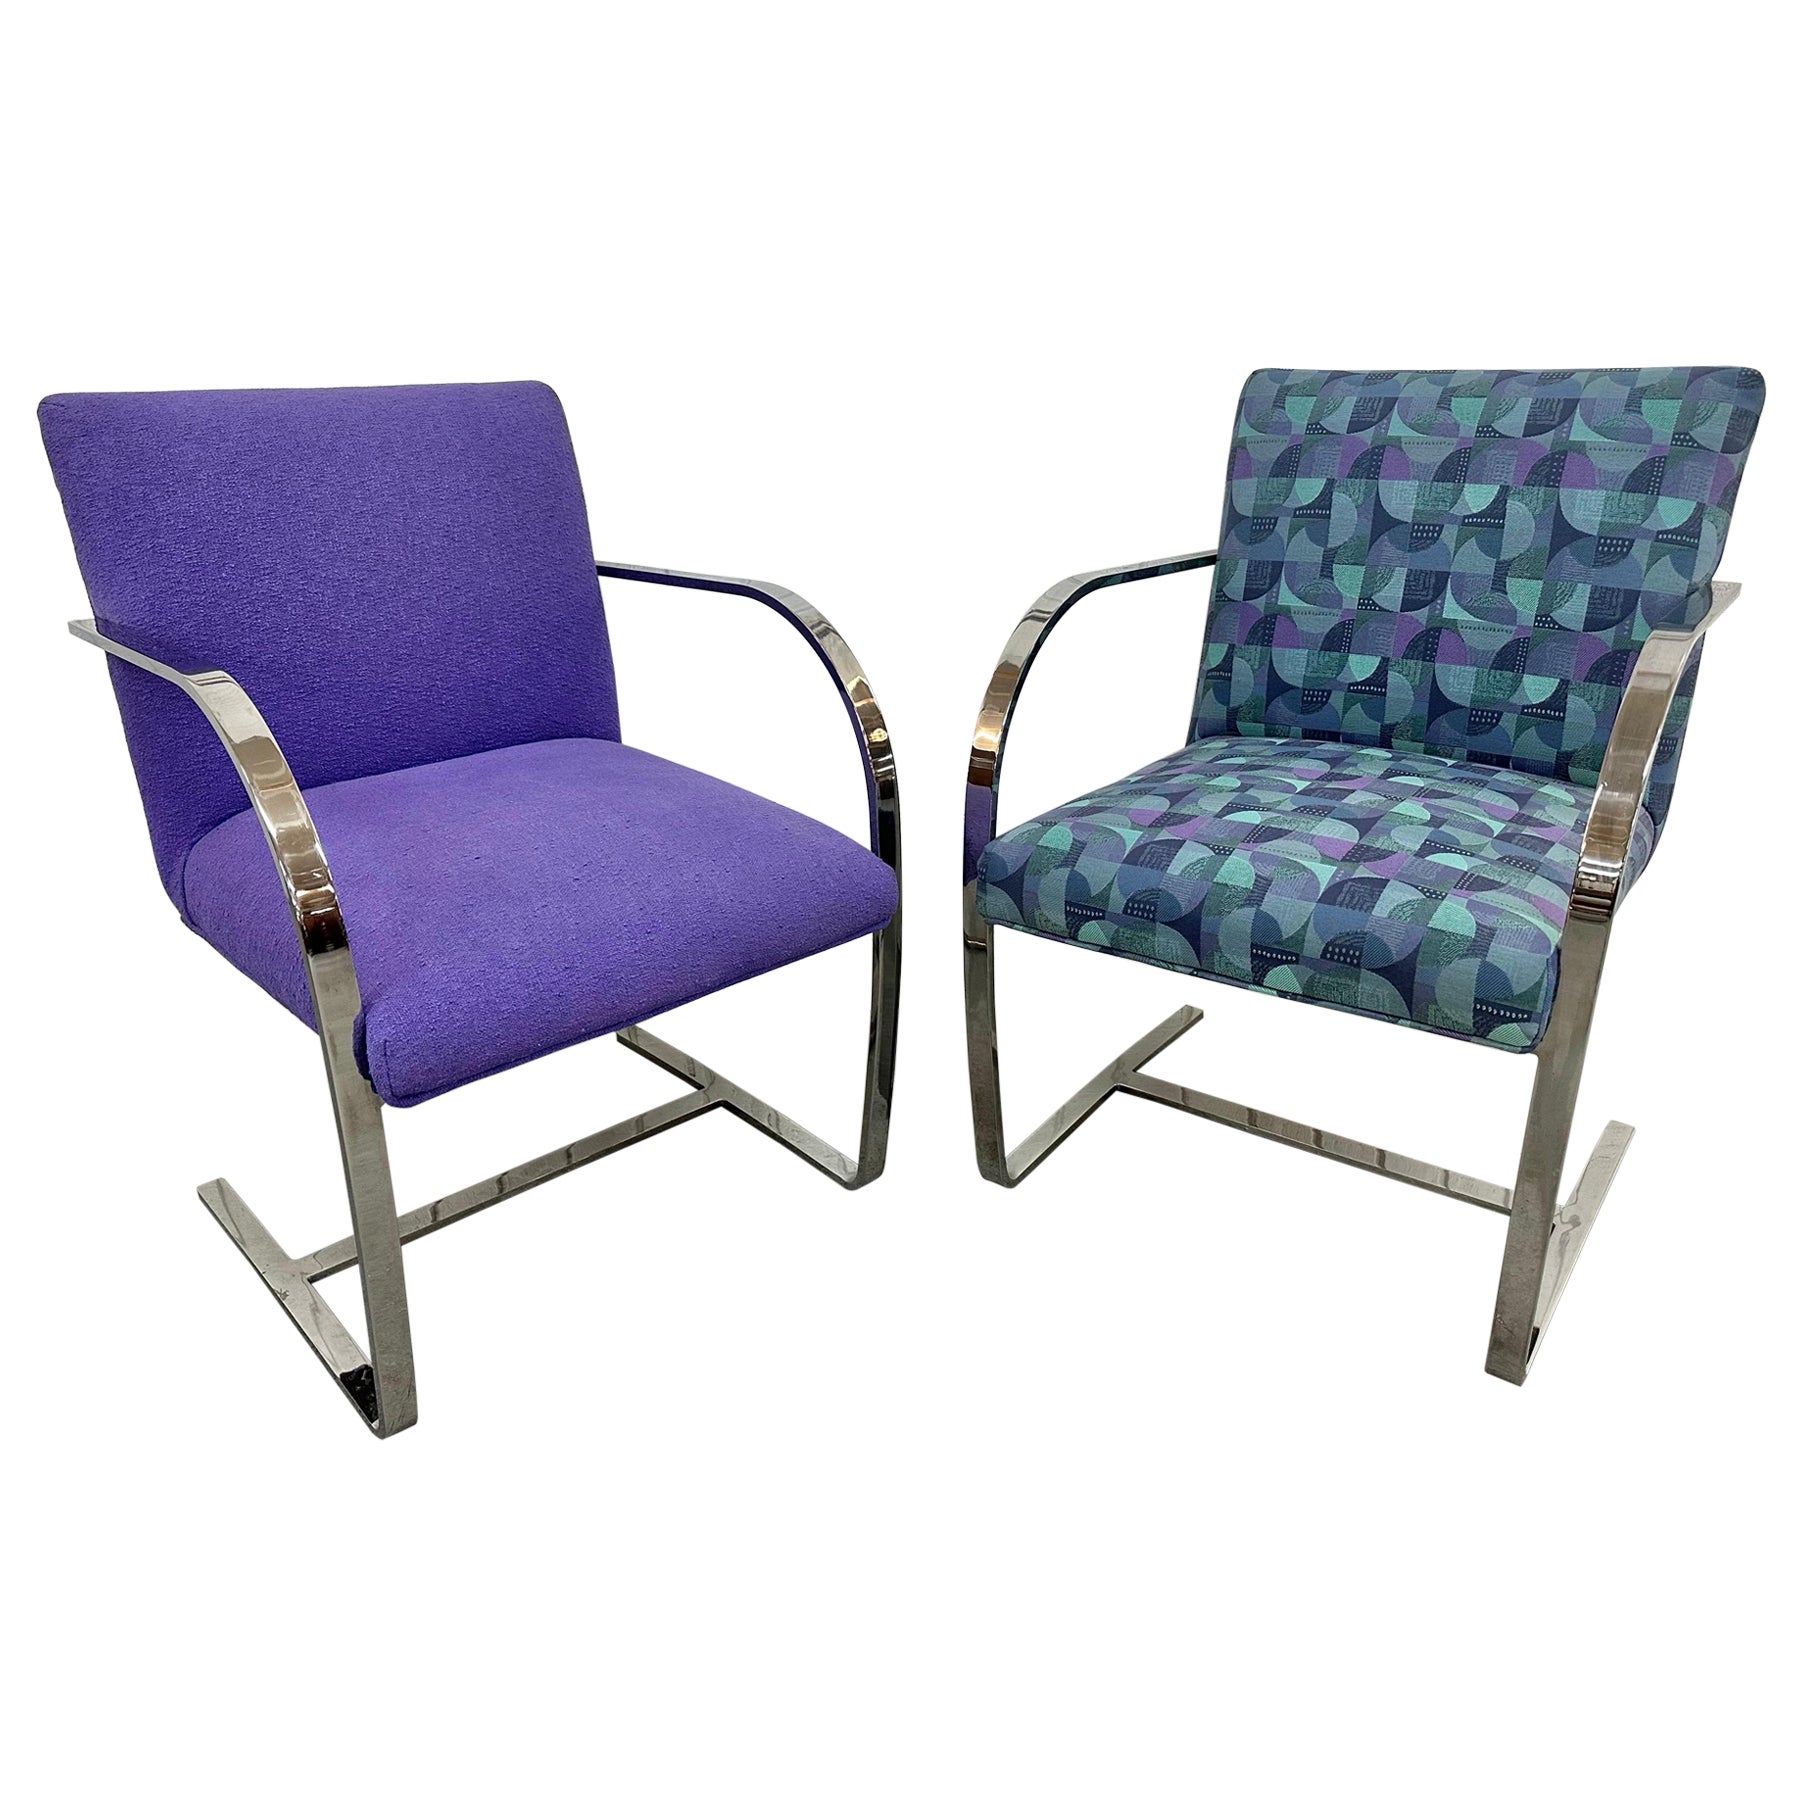 Vintage Modern Bruno Chrome Arm Chairs - Set of 2 For Sale